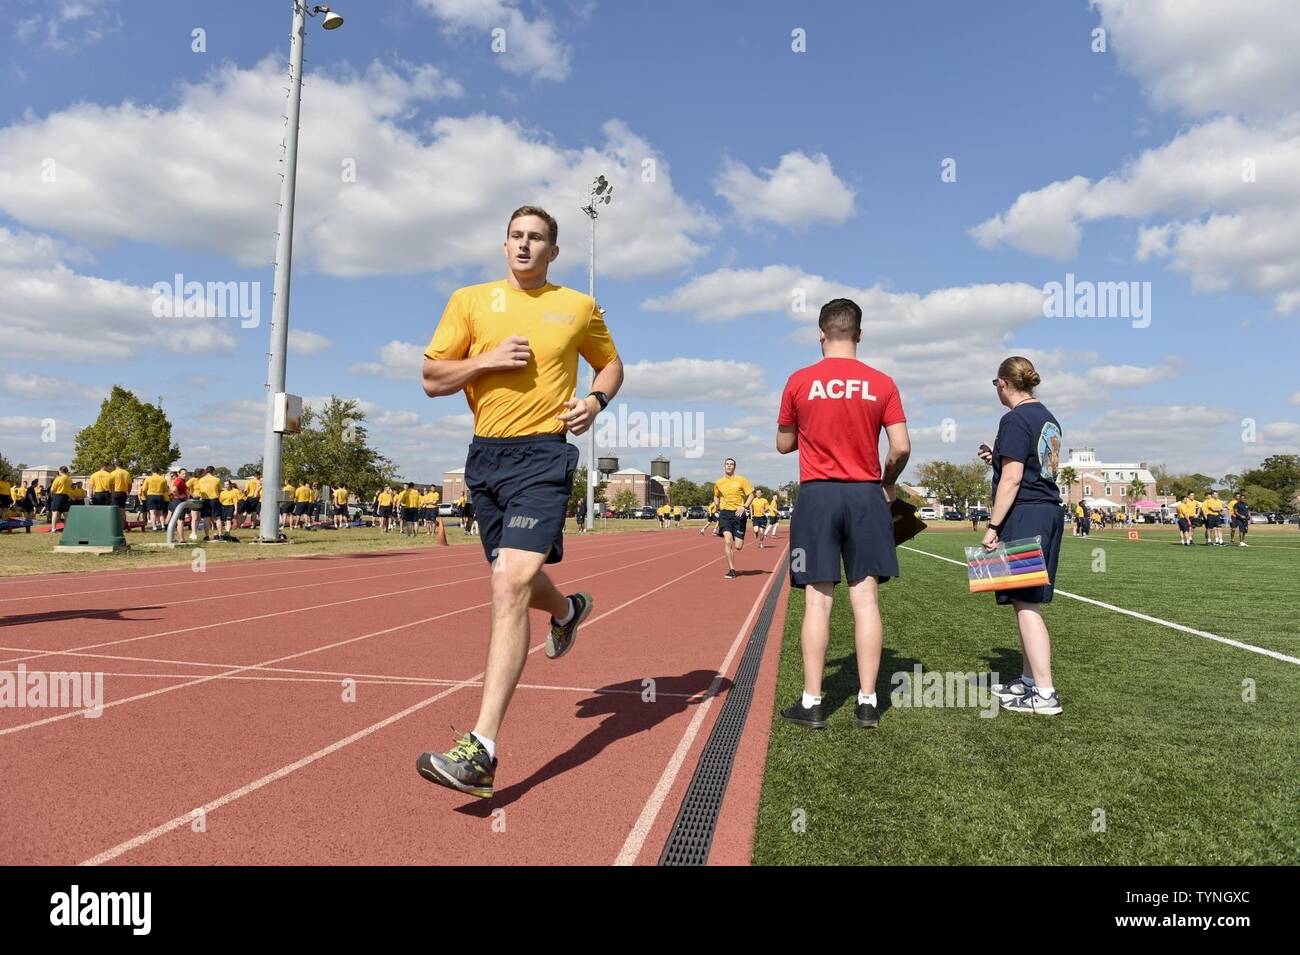 Fla. (Nov. 18, 2016) Seaman Clarke Lange, an information systems technician 'A' school student at  Information Warfare Training Command (IWTC) Corry Station, finishes a 400-meter dash during the command's 'Warrior Day' event. Warrior Day is a series of athletic competitions aimed at promoting resiliency, teamwork and physical fitness among IWTC Corry Station students. Stock Photo